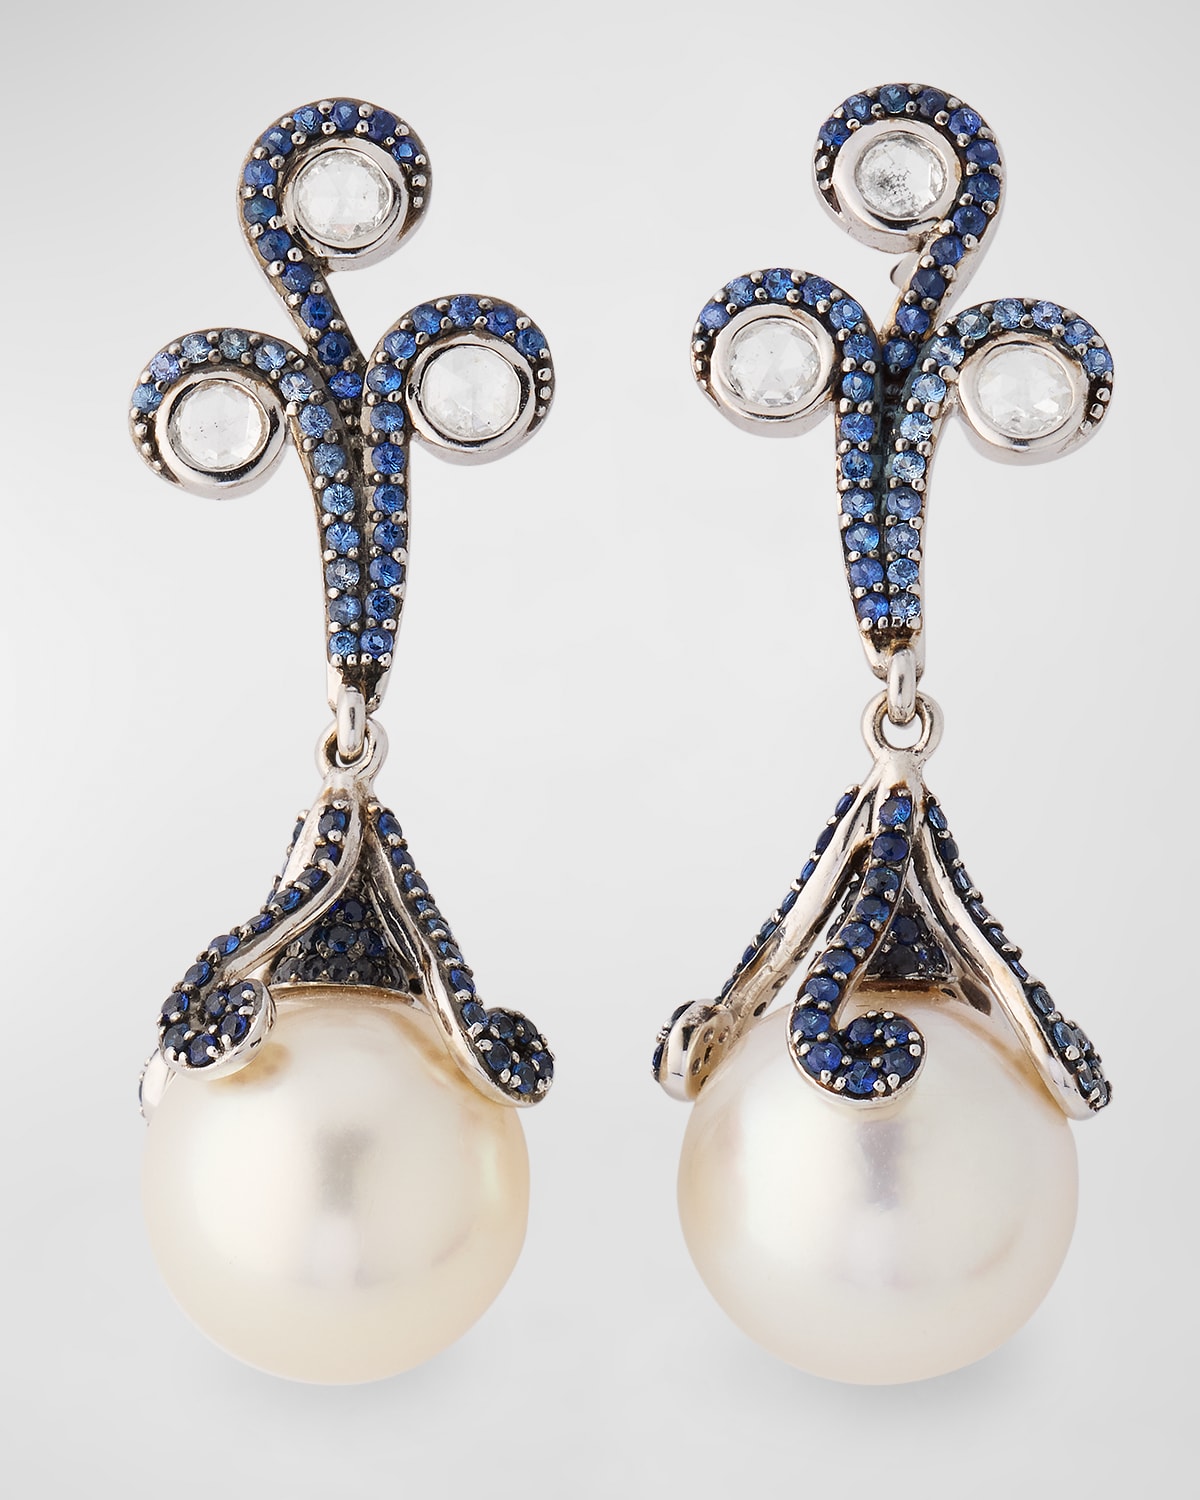 18K White Gold 12mm South Sea Pearl, Sapphire and Diamond Earrings